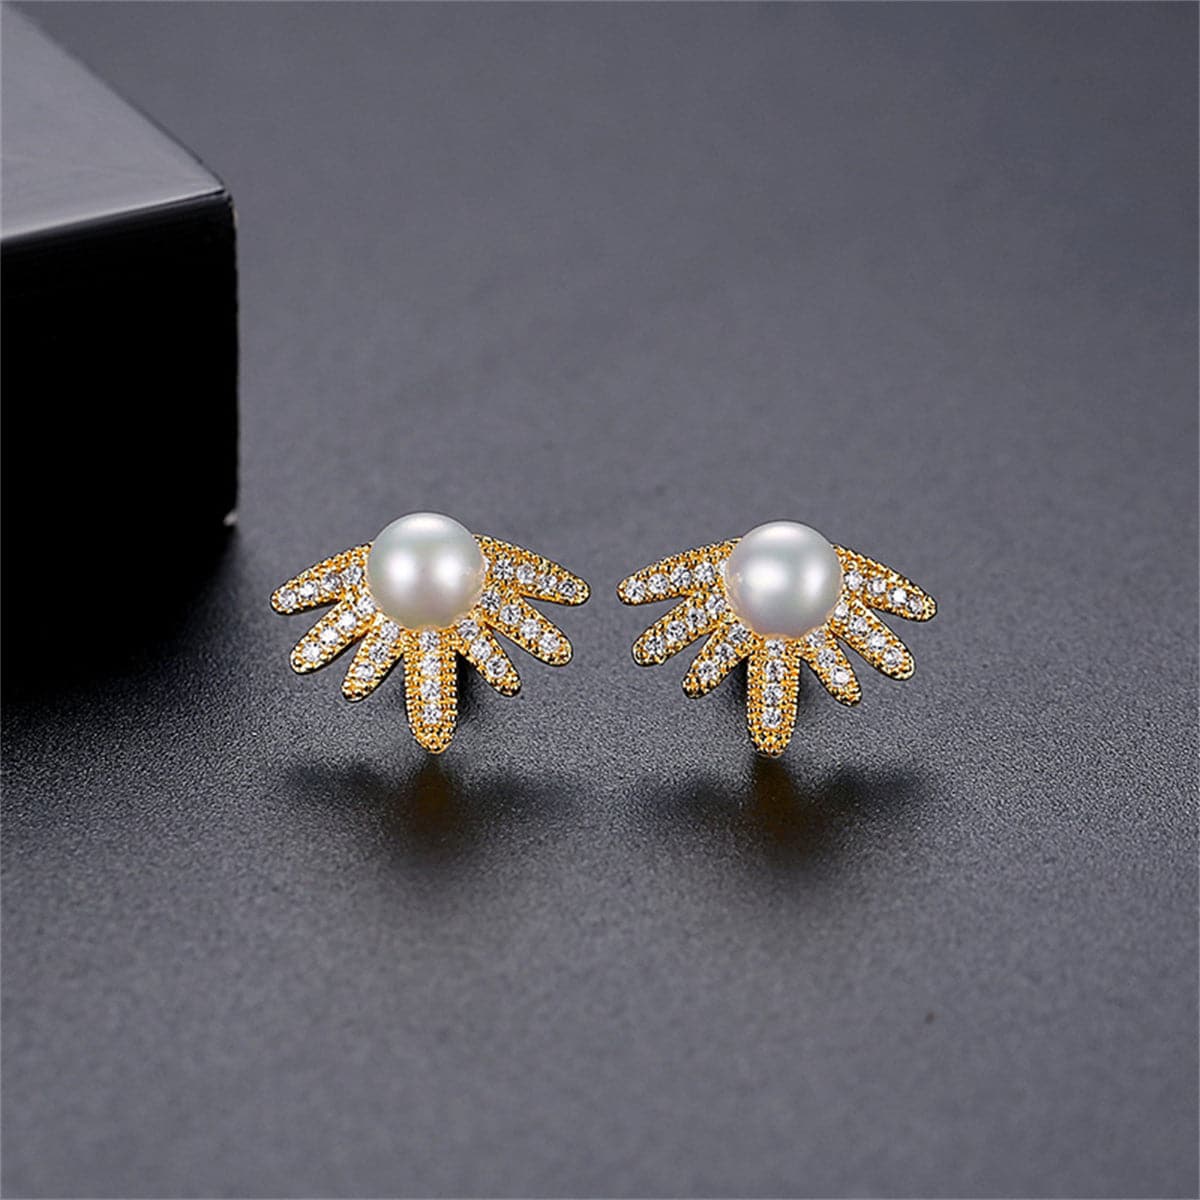 Pearl & Cubic Zirconia 18K Gold-Plated Botanical Stud Earrings